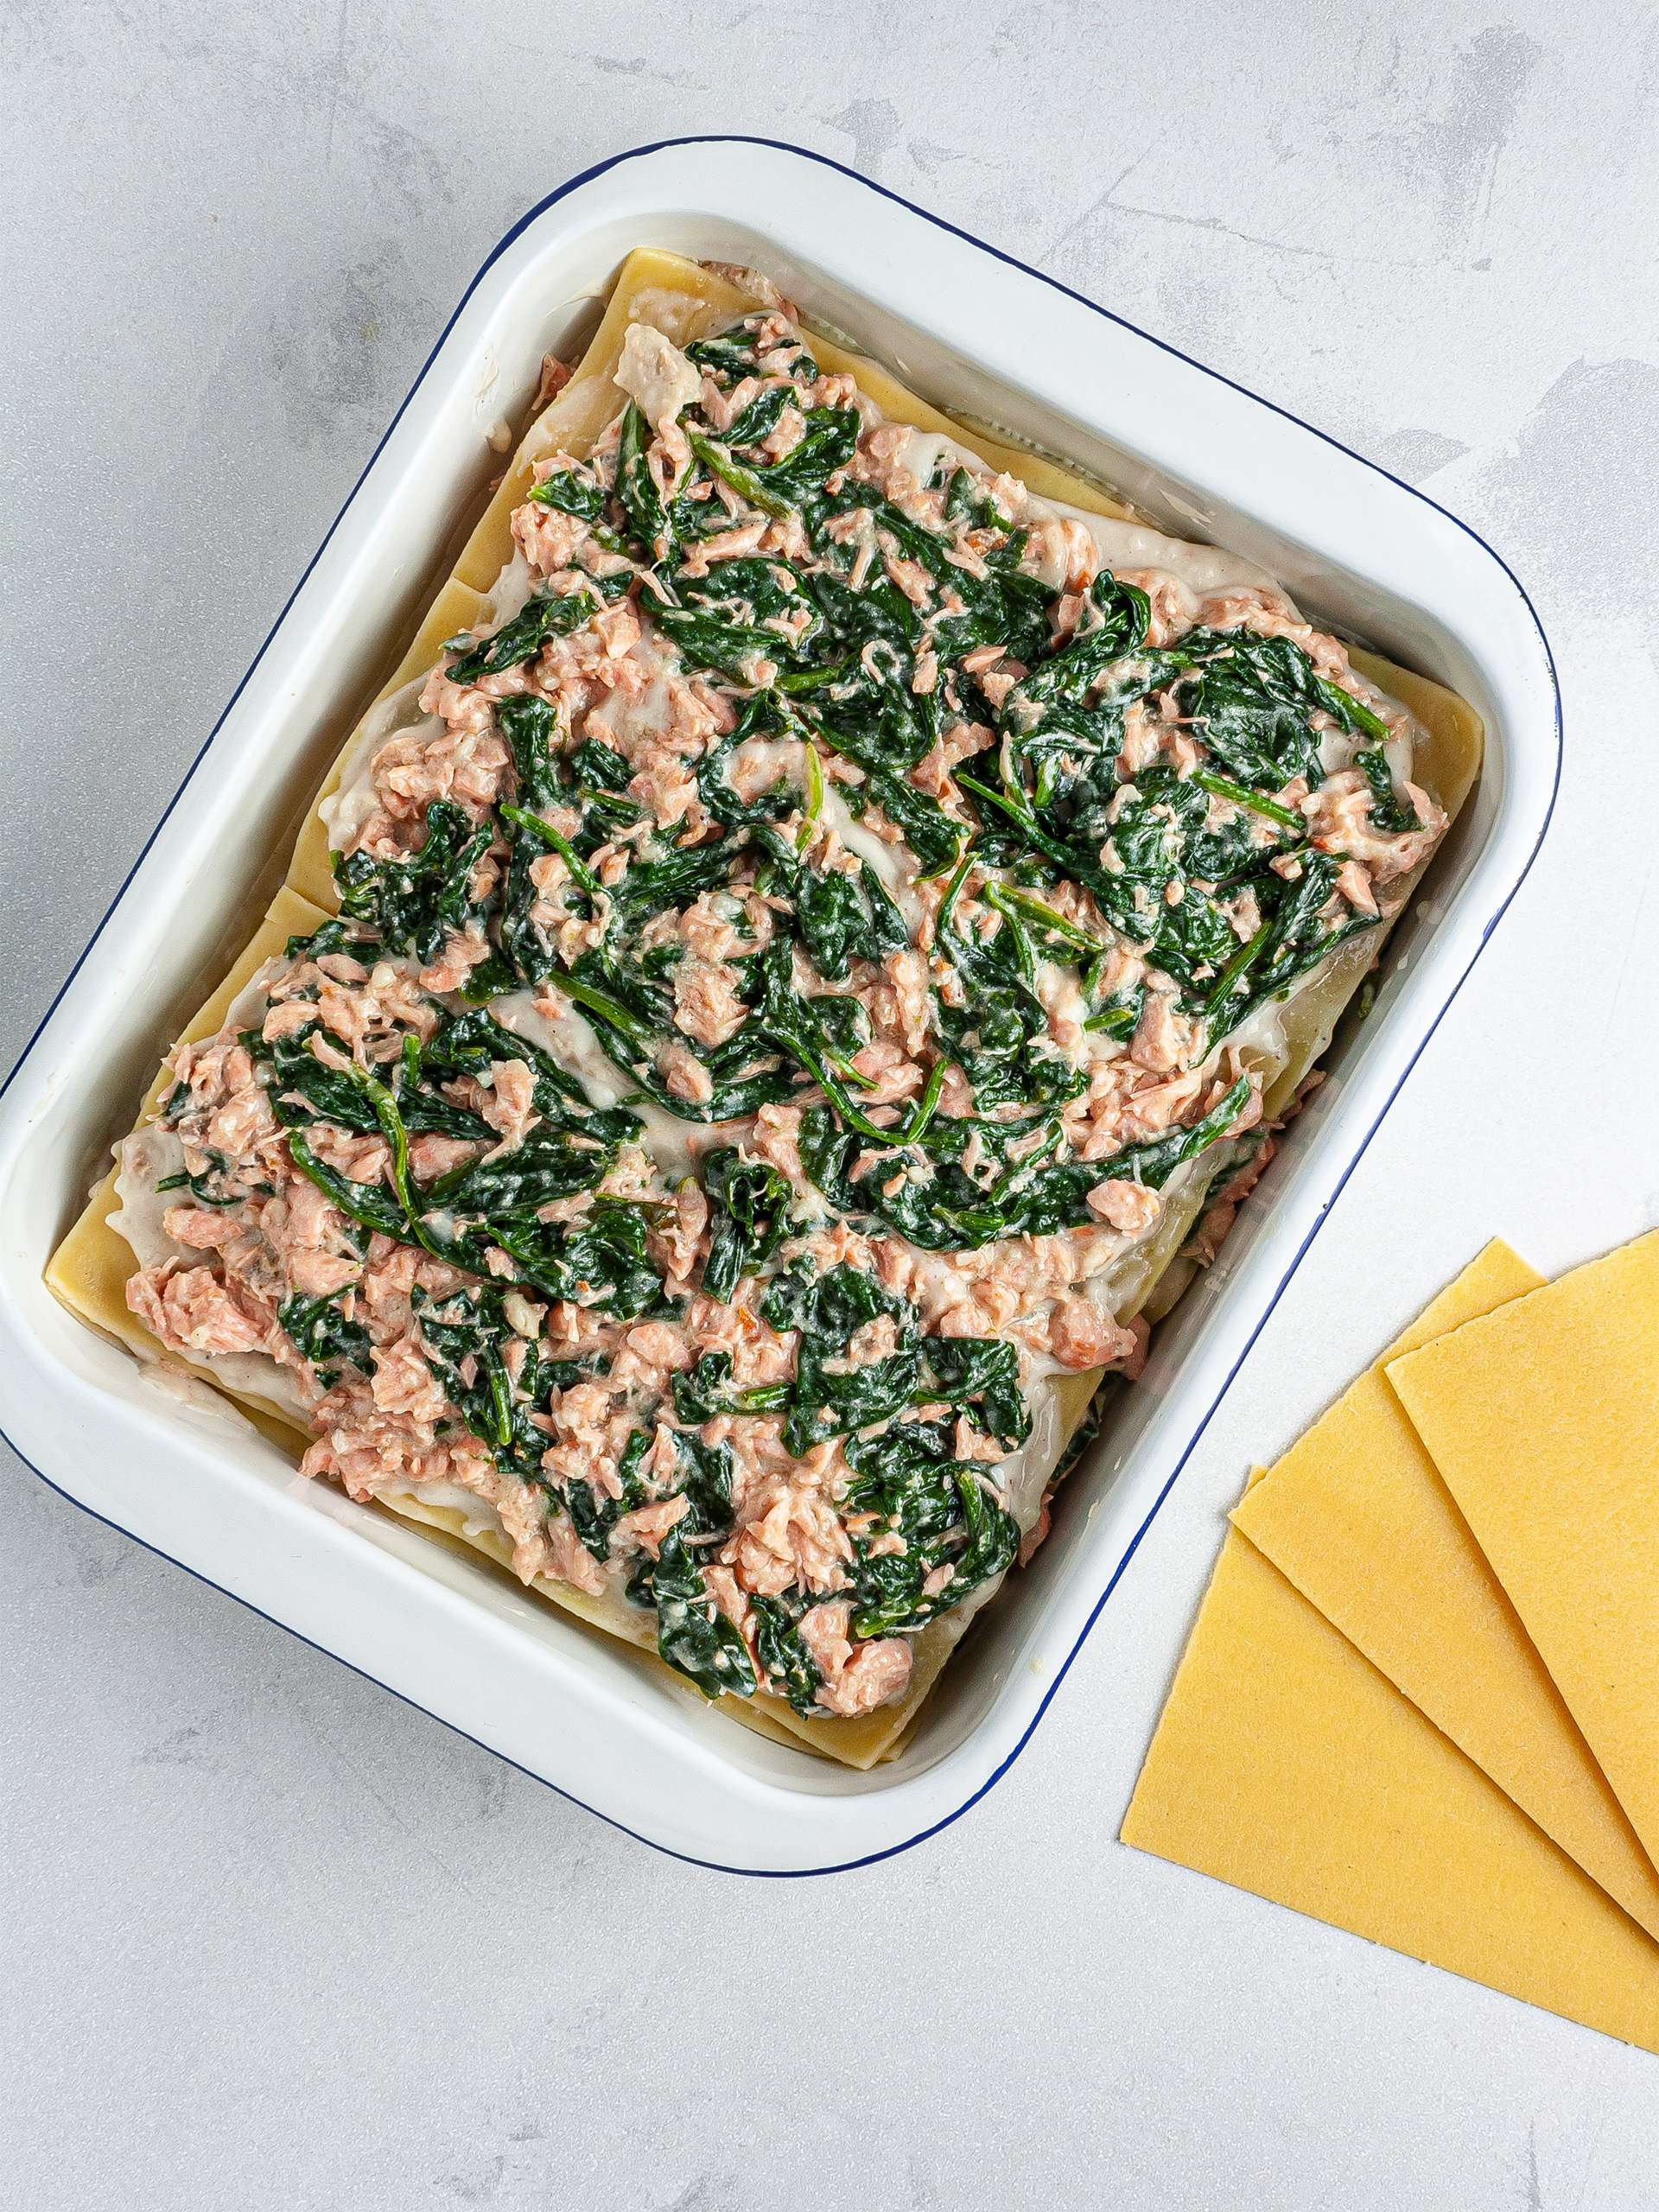 Lasagna assembled with salmon, spinach, and bechamel sauce